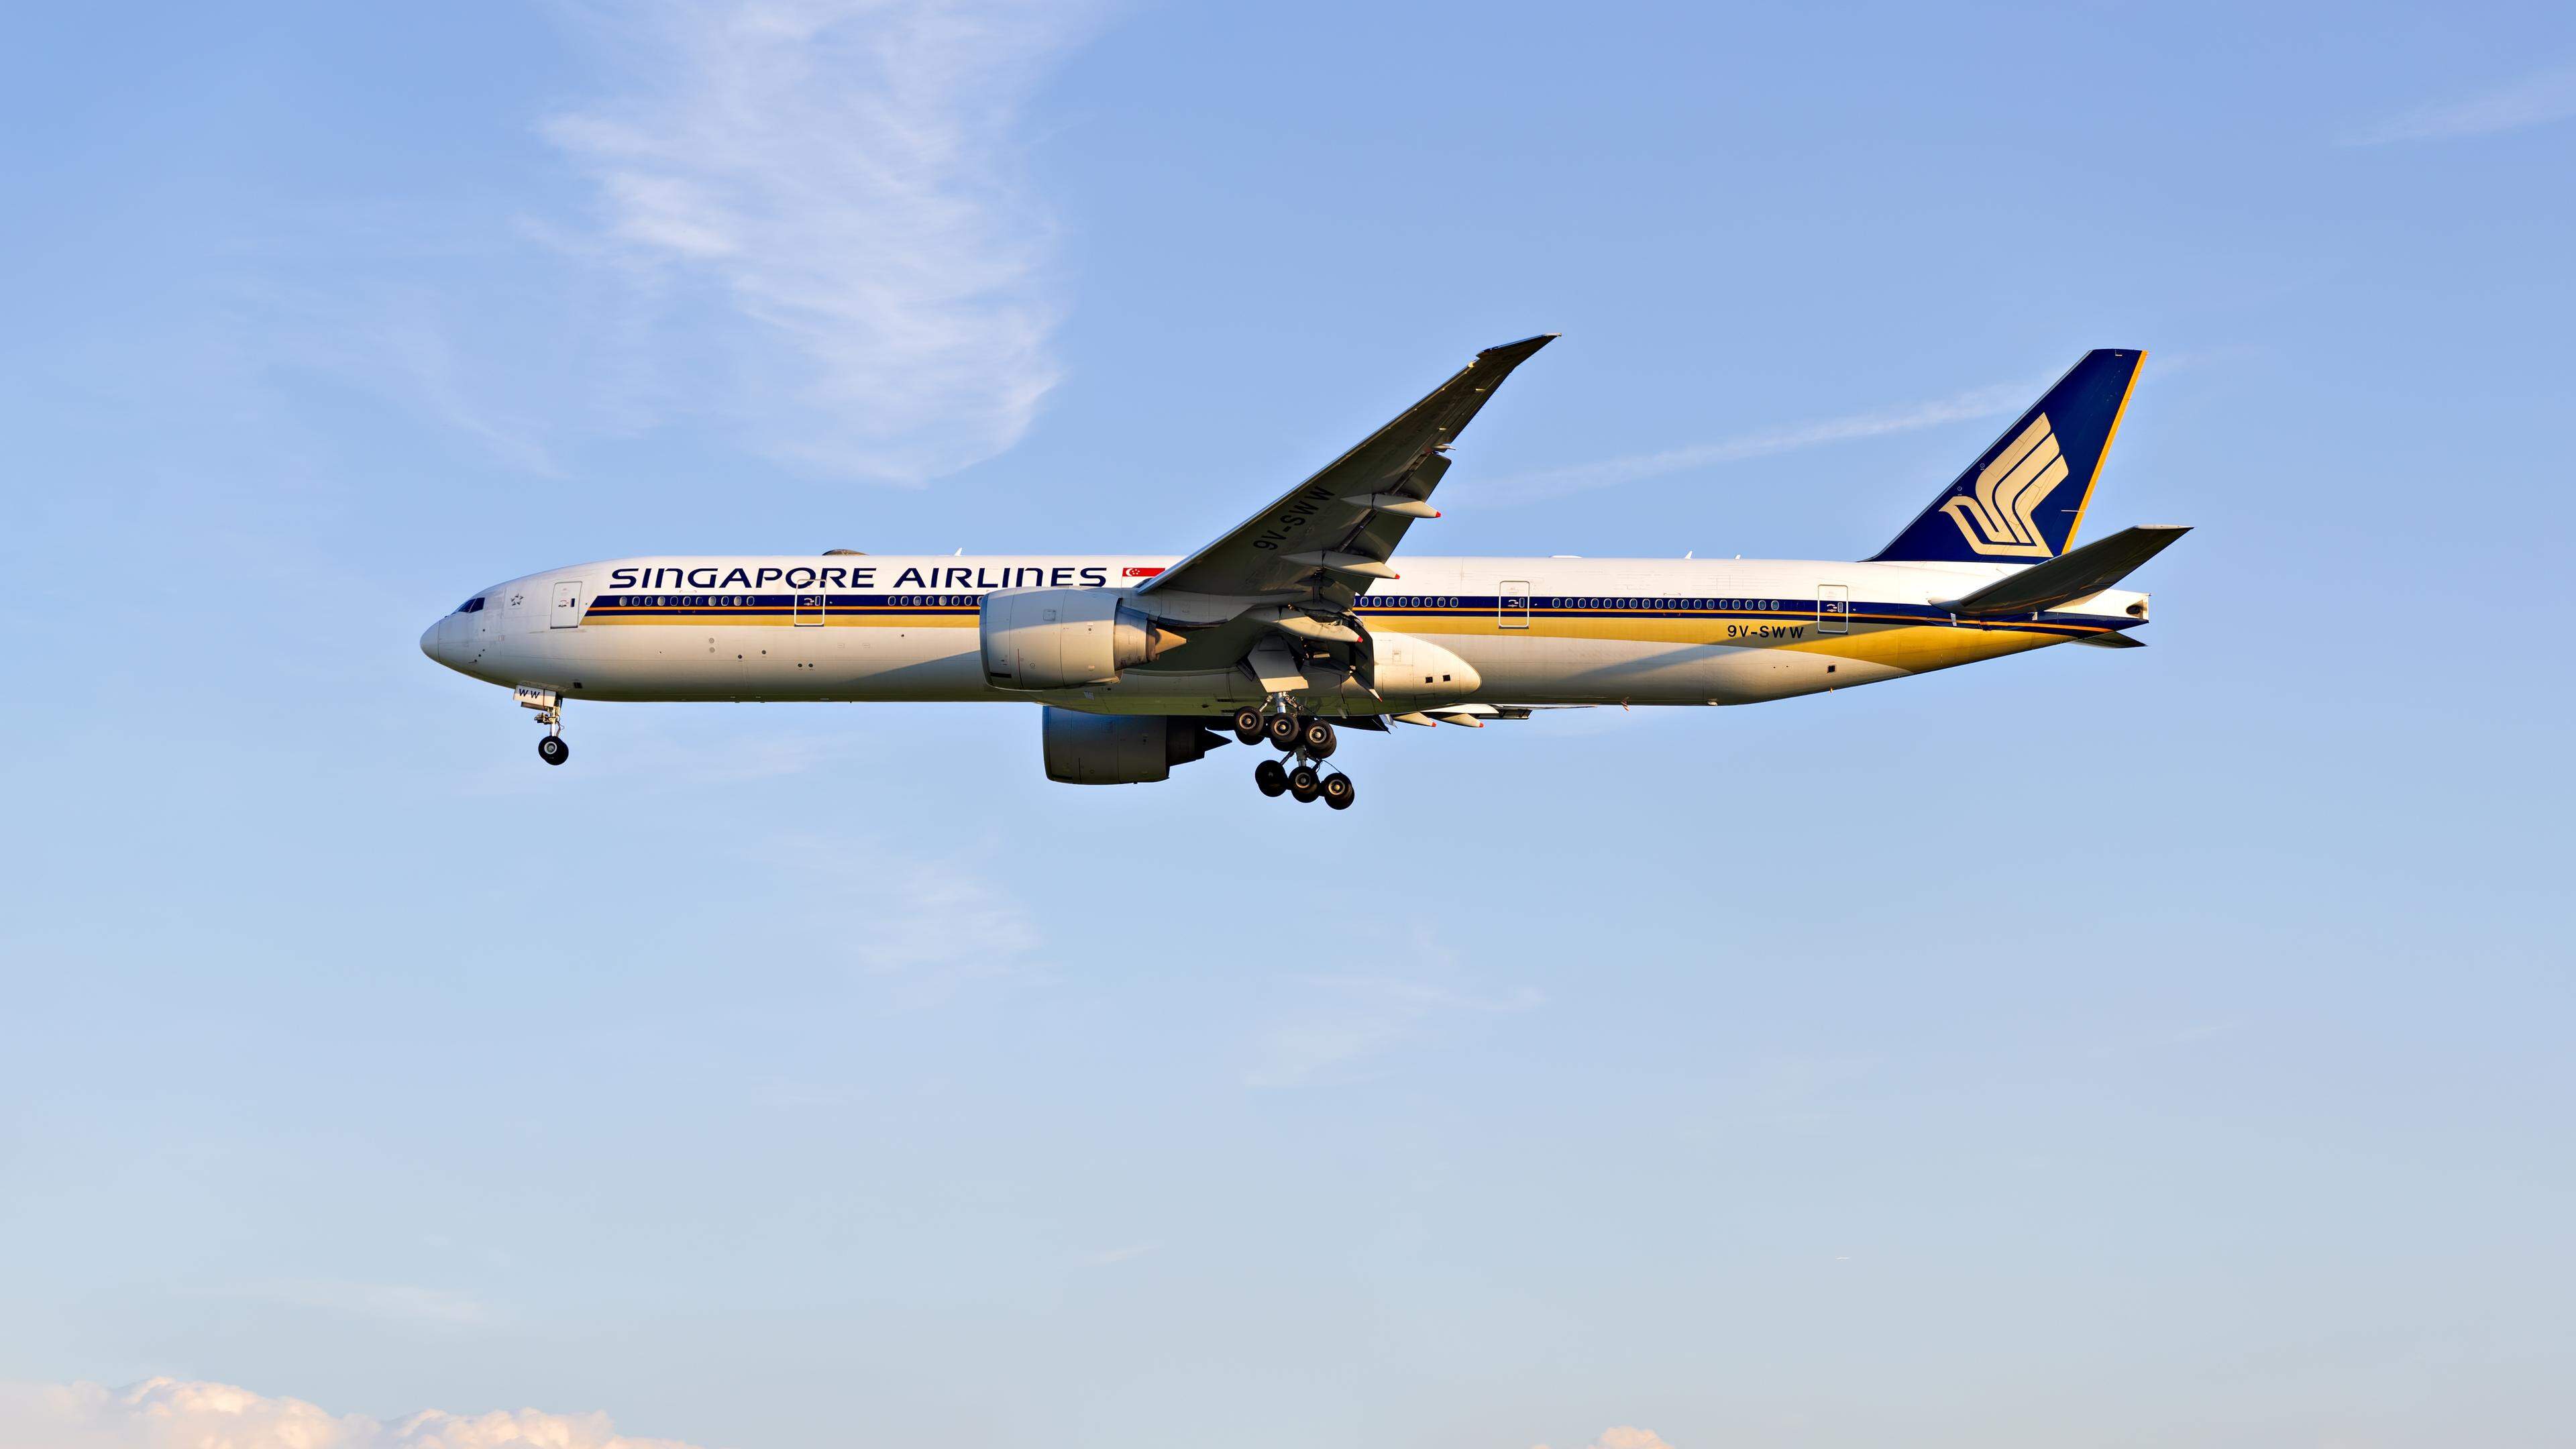 The Singapore Airlines Boeing 777 was was travelling from London Heathrow to Singapore when it encountered severe turbulence